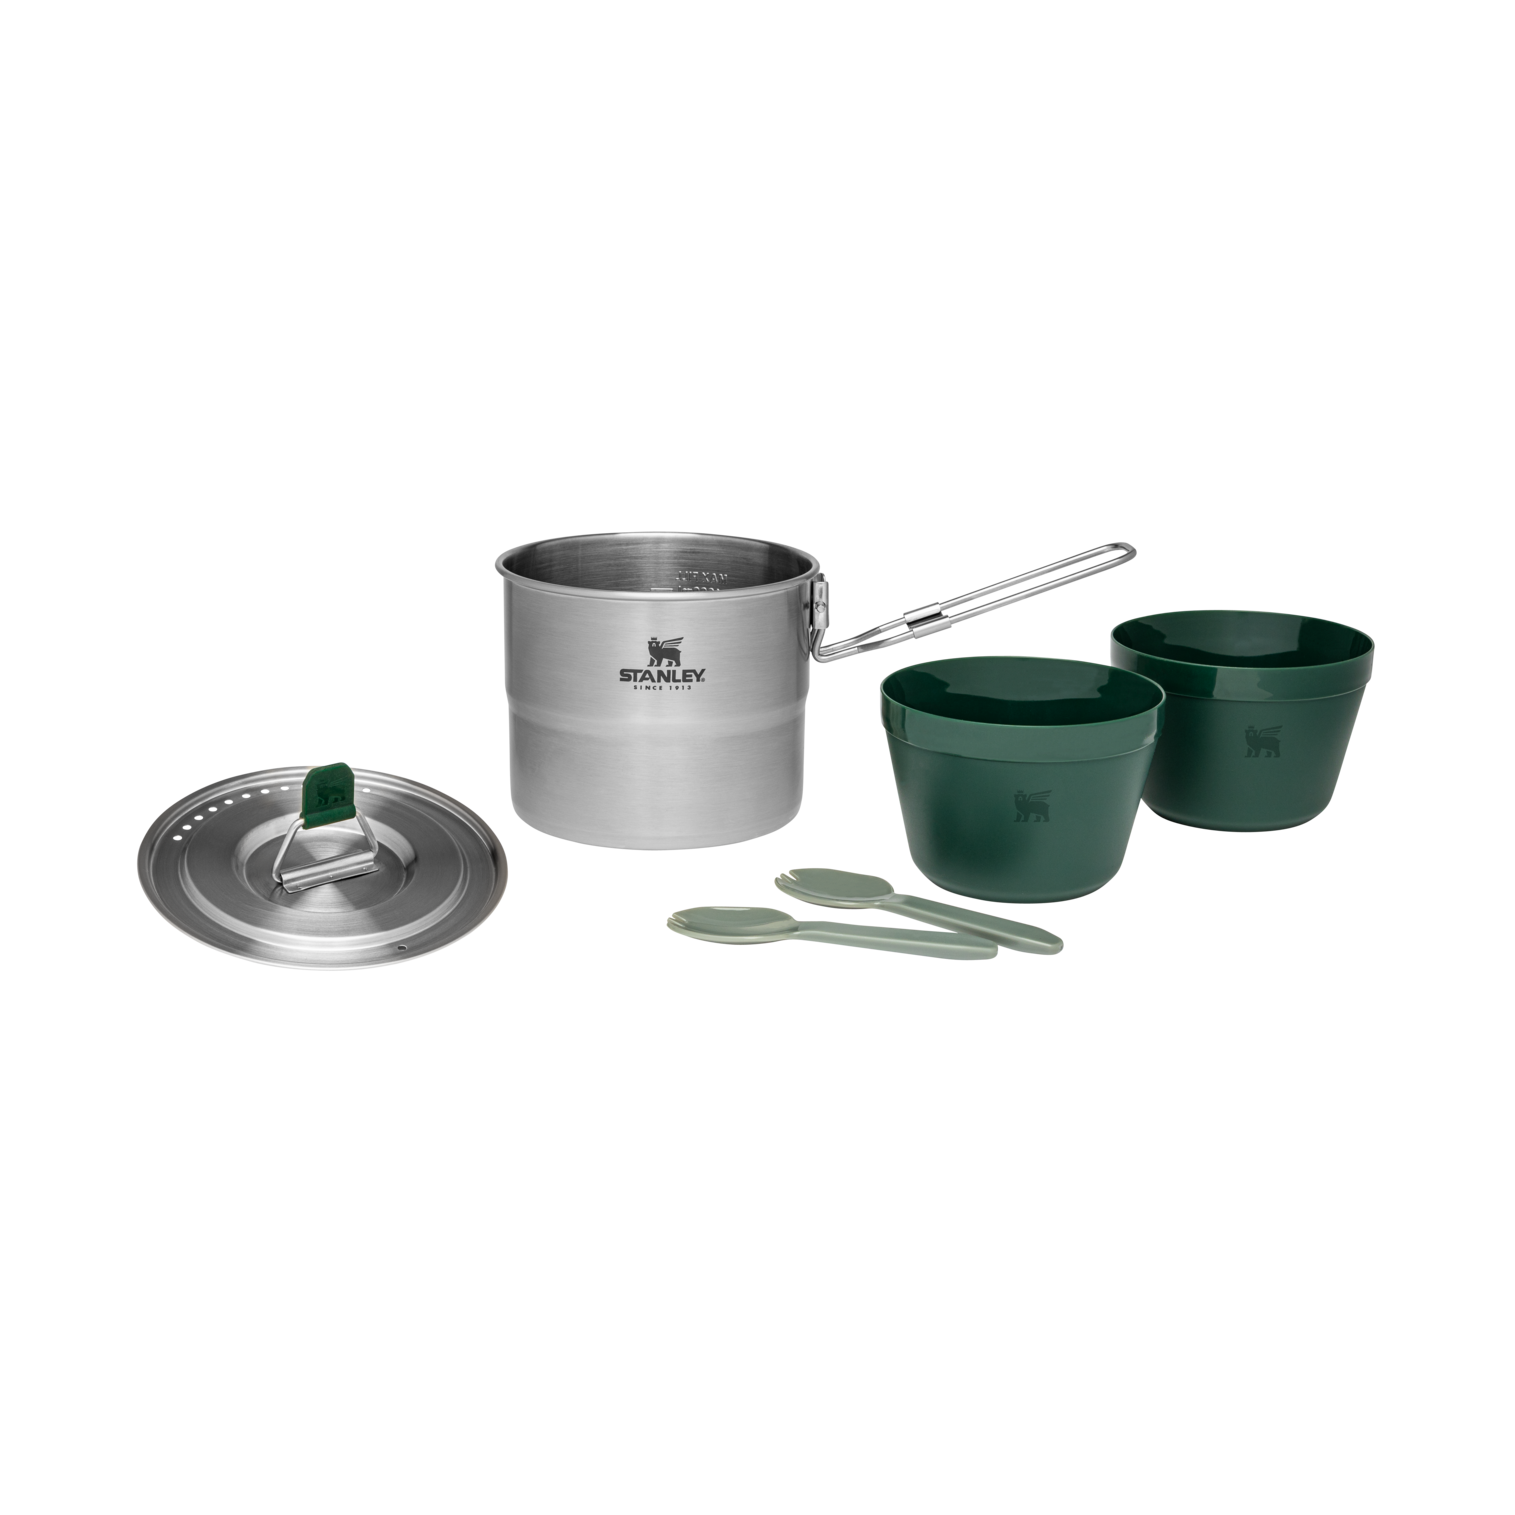 Adventure Stainless Steel Cook Set For Two | 1.1 QT | Stanley